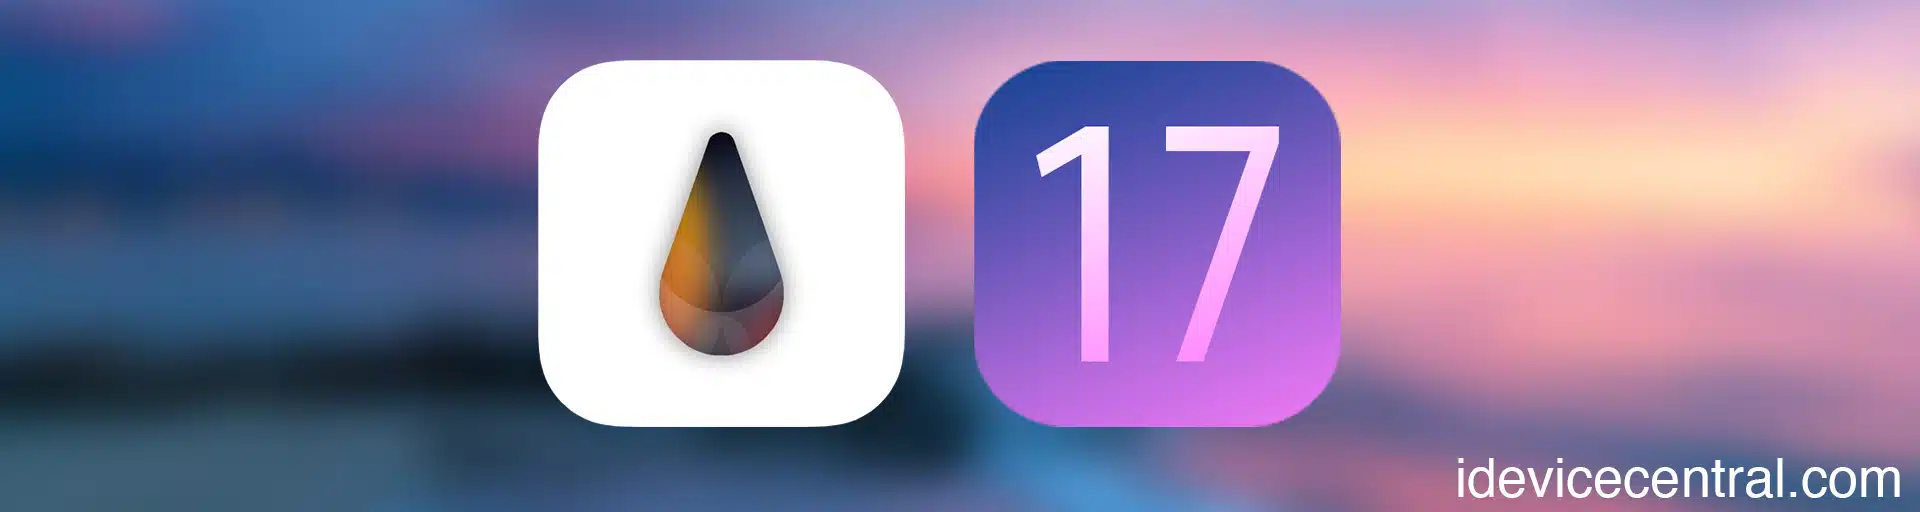 iOS 17 JAILBREAK: The Most Complete Guide